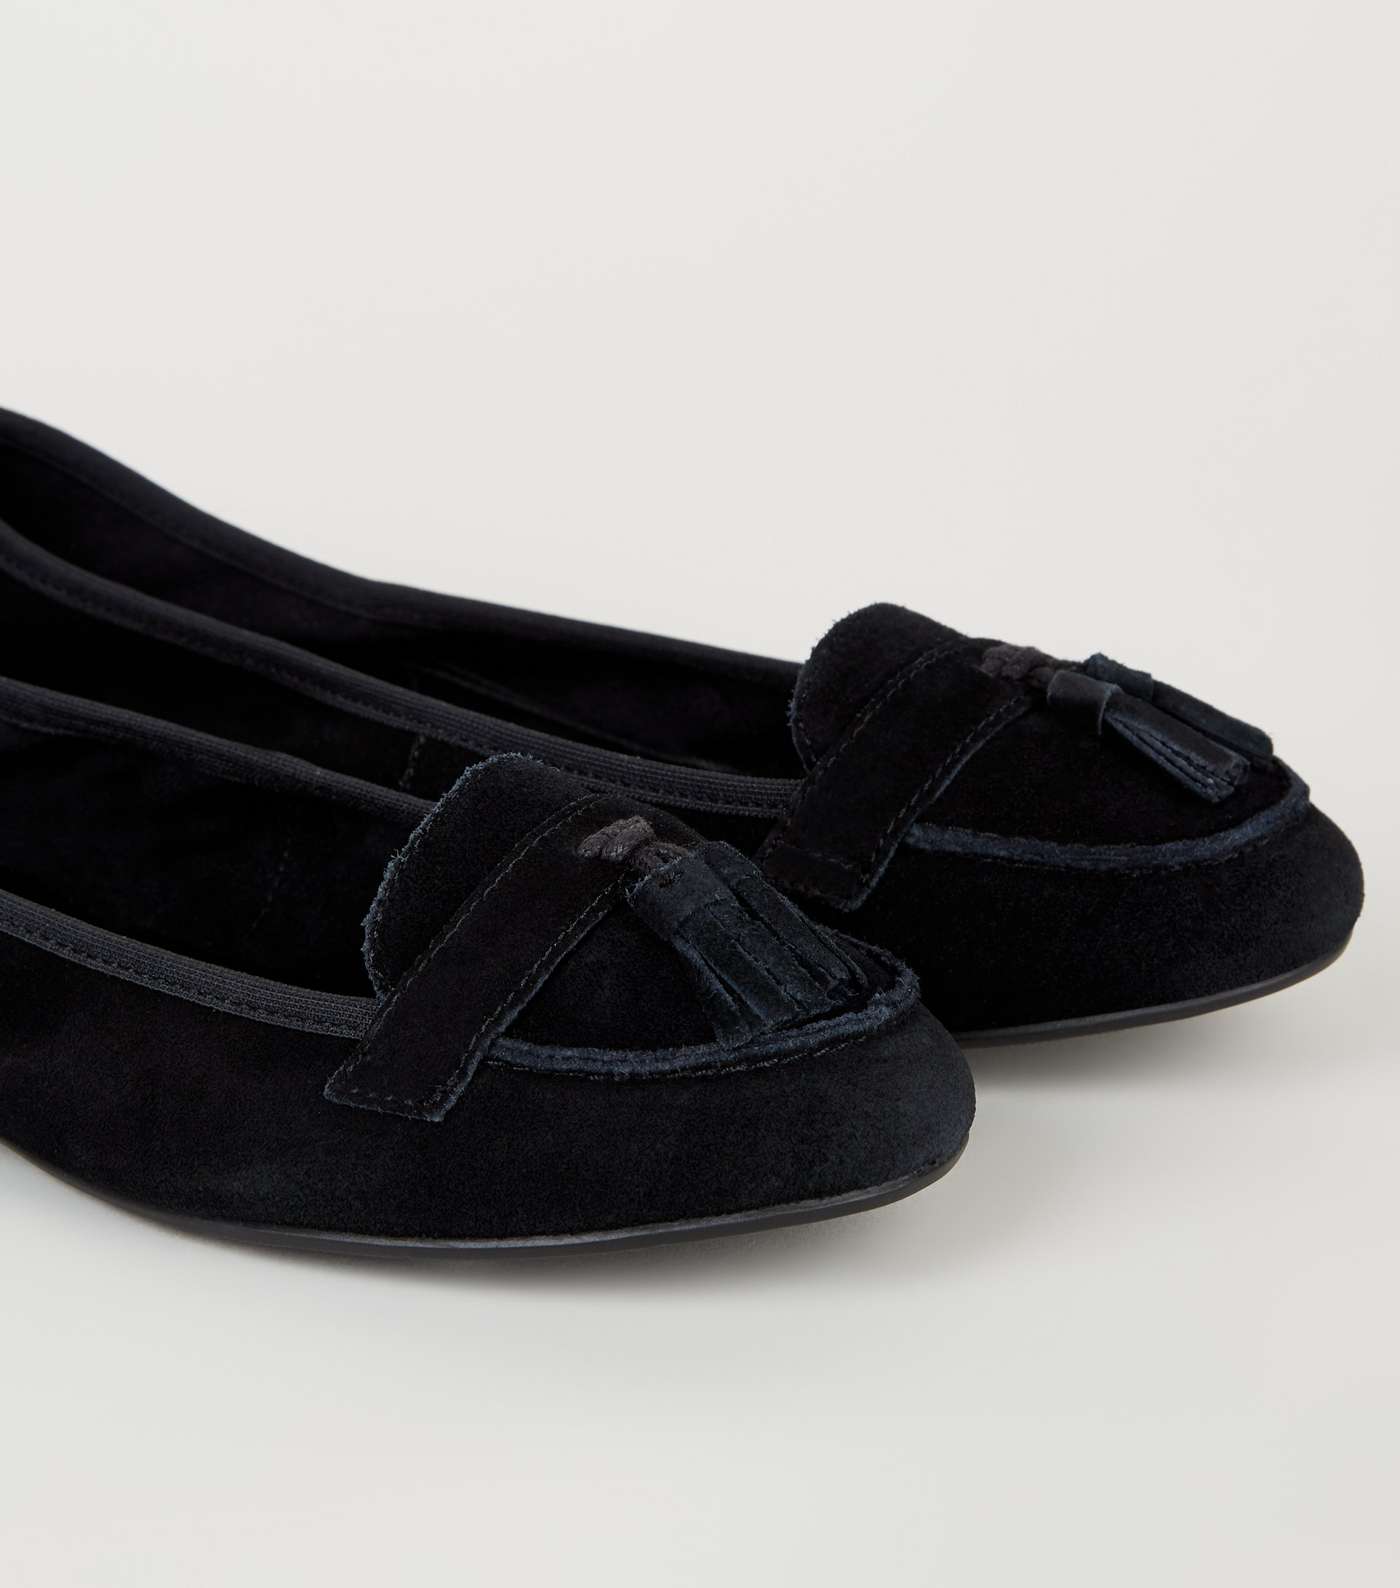 Wide Fit Black Suede Elasticated Loafers Image 3